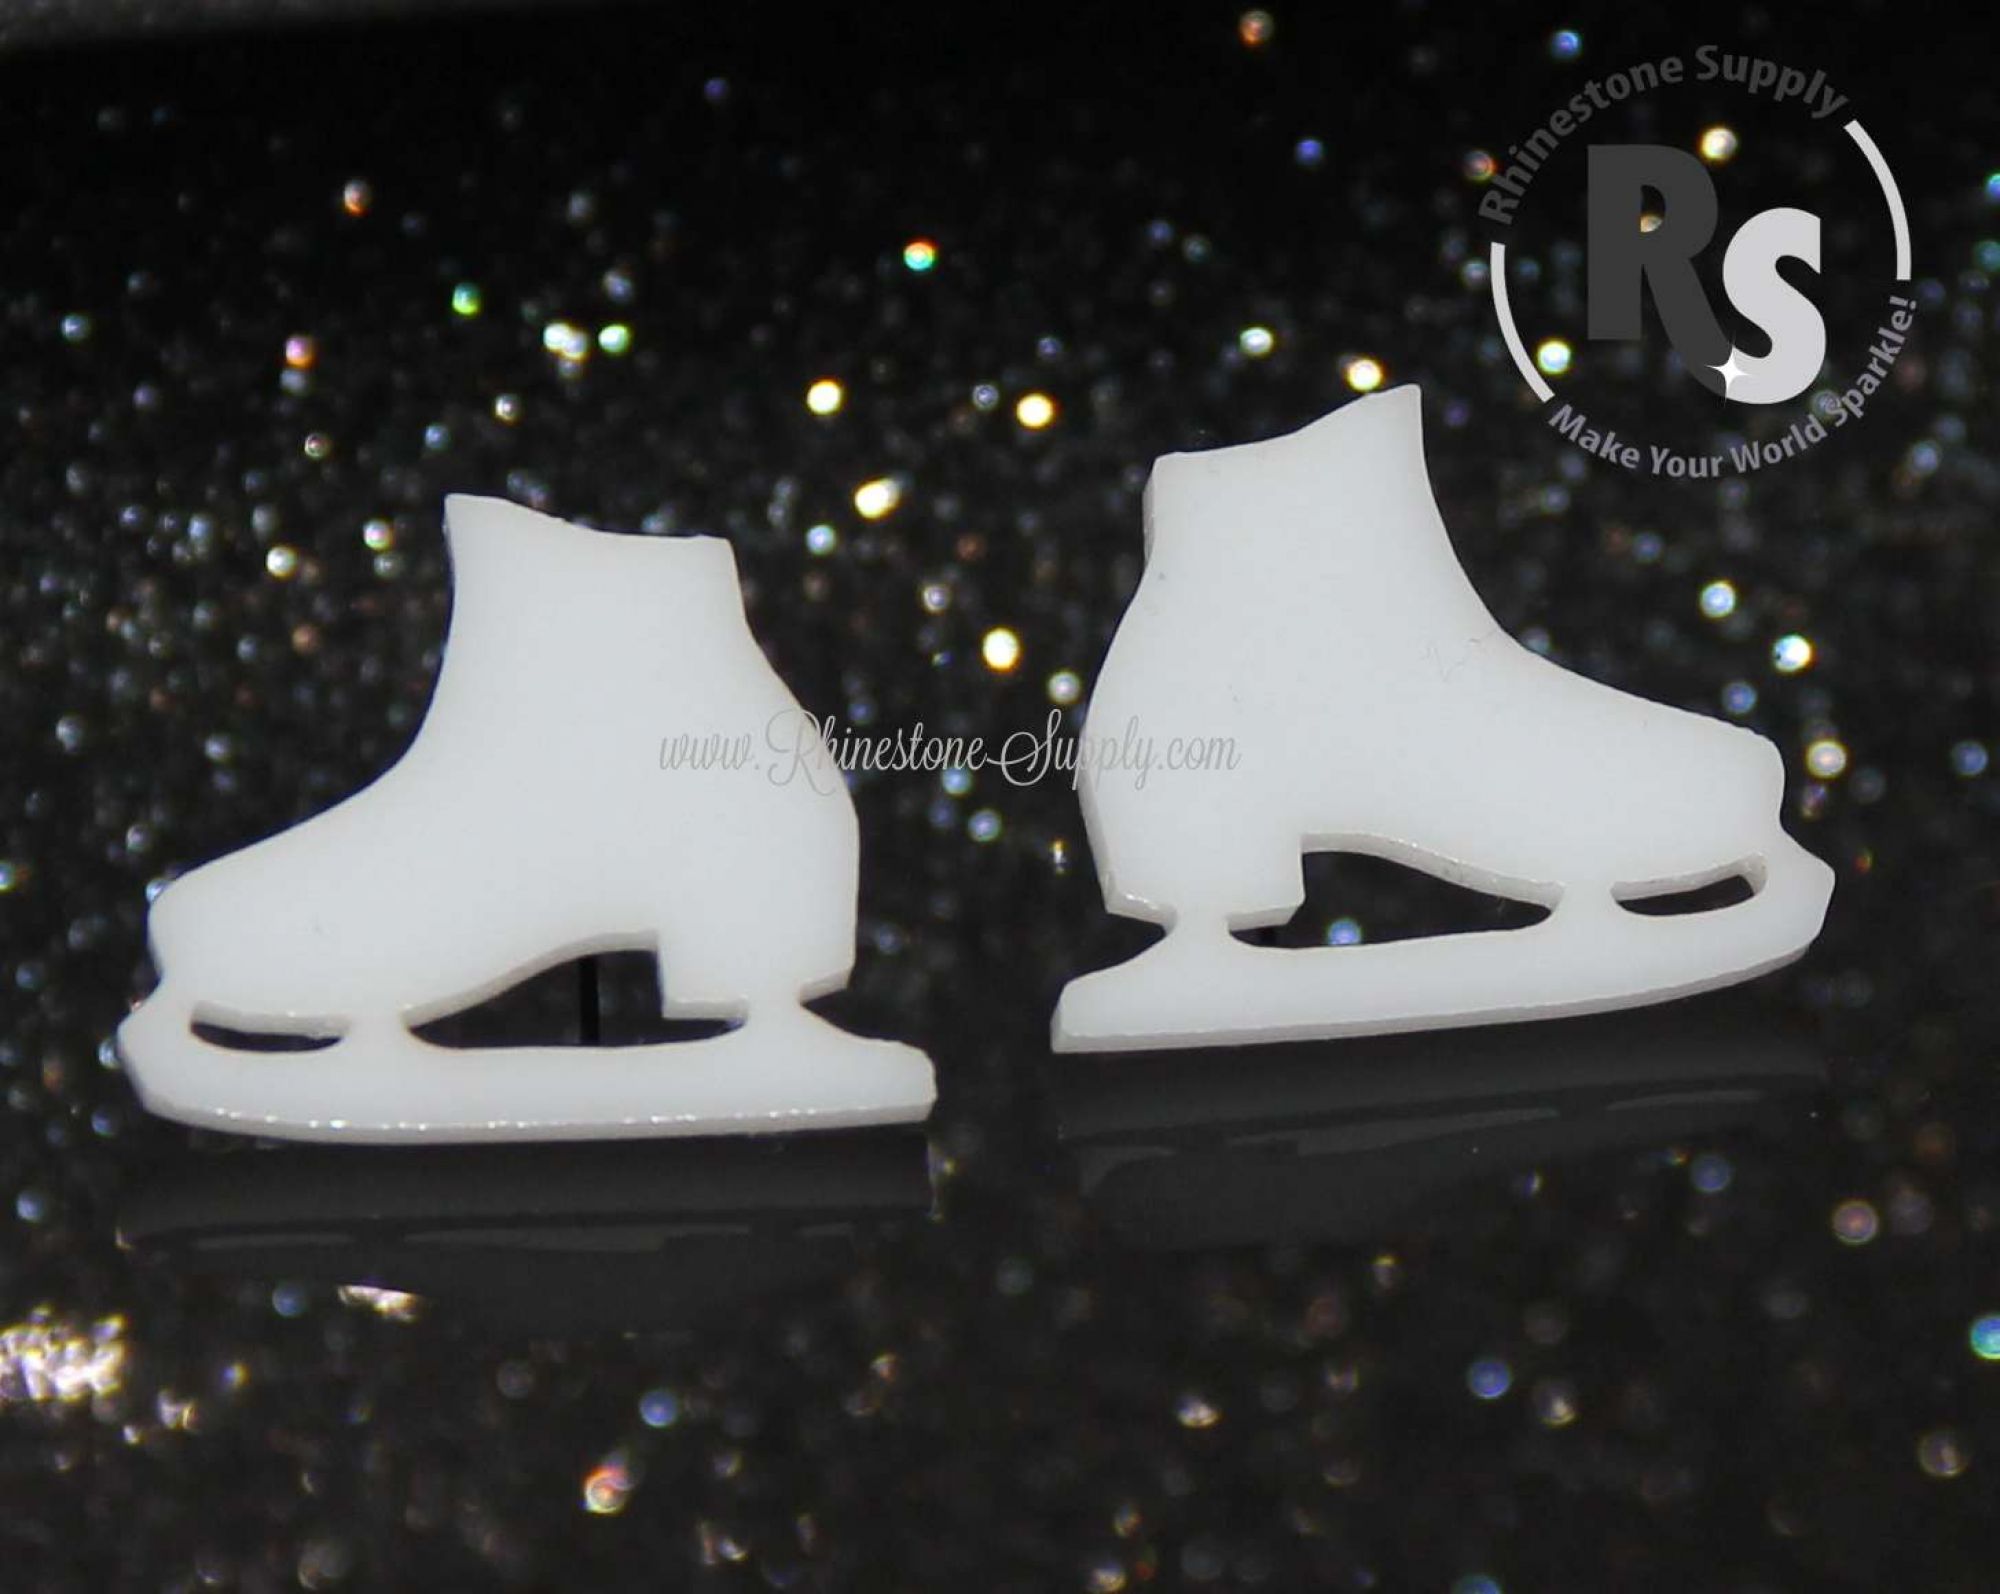 ICE SKATE Earrings - Acrylic in choice of Black or White